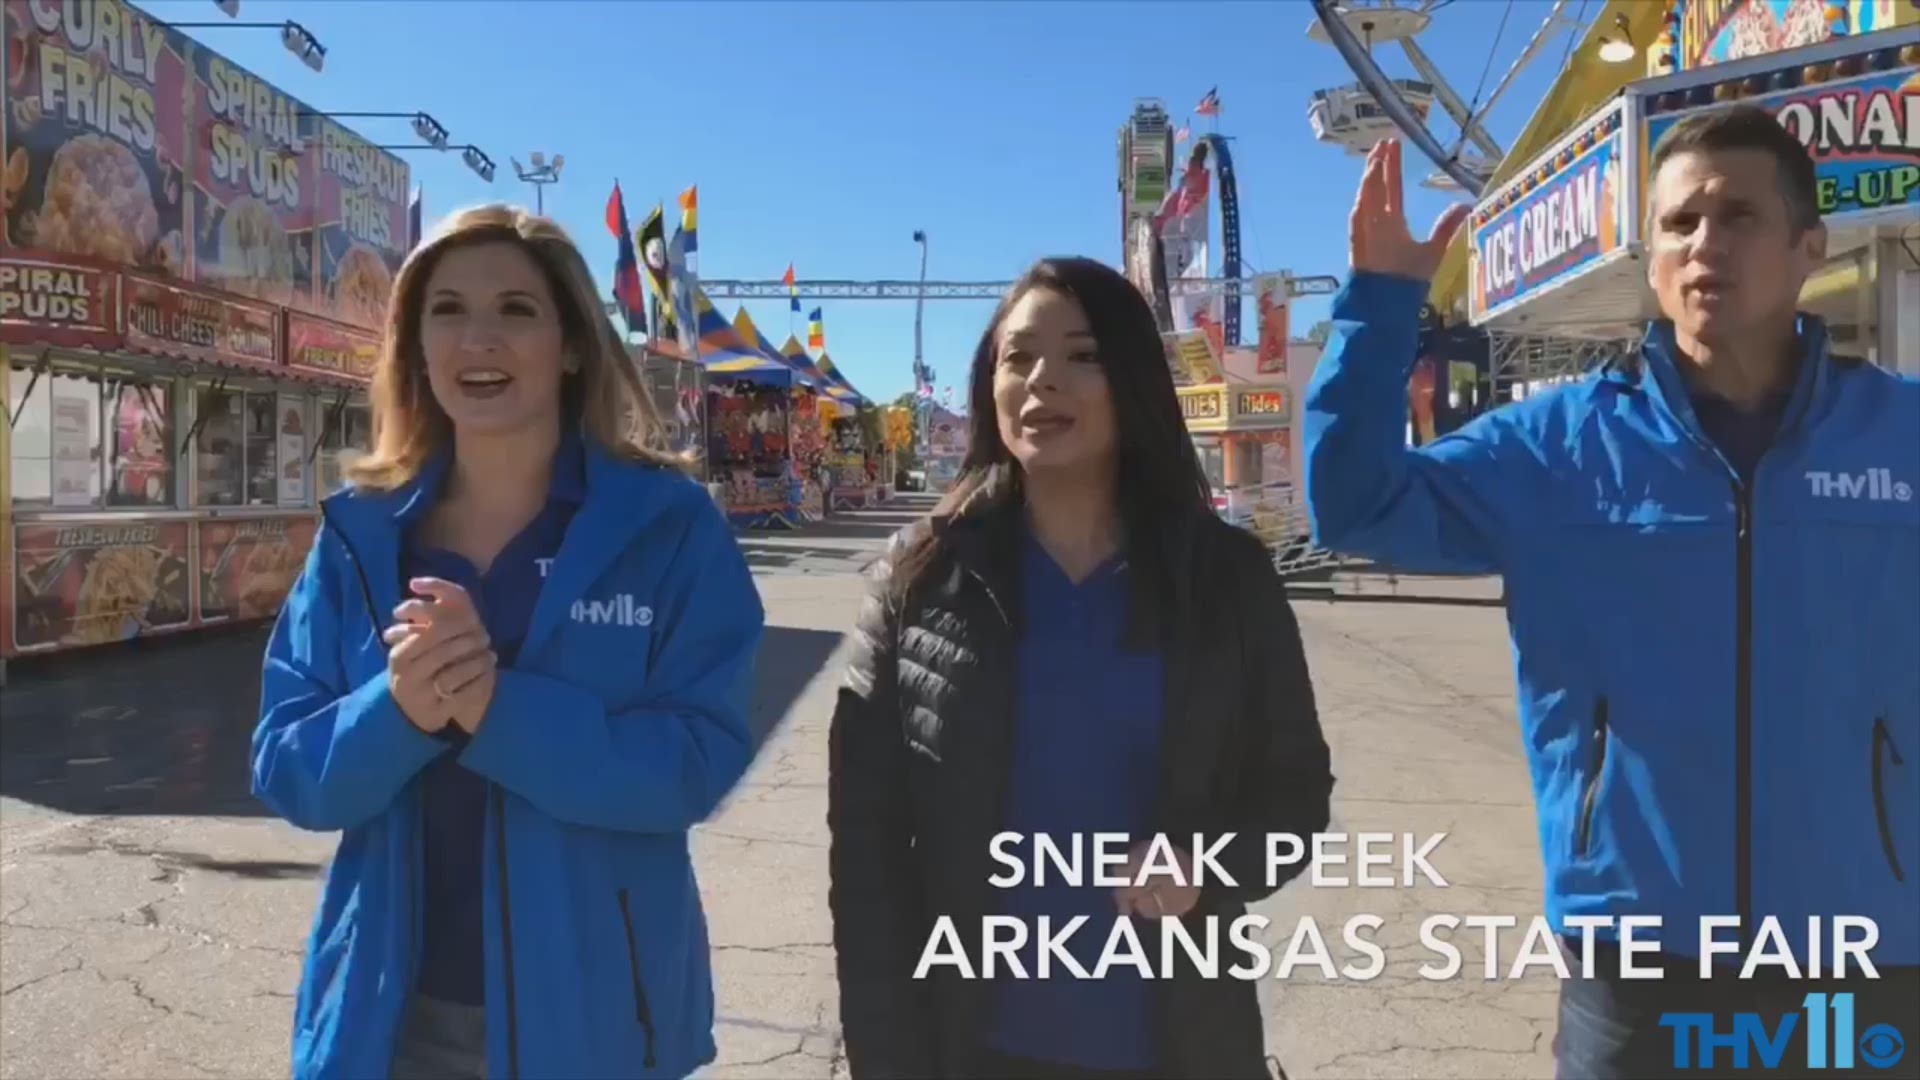 Laura Monteverdi, Rob Evans and Mariel Ruiz headed out to the 79th Annual Arkansas State Fair to give us a sneak peek ahead of the official opening at 4 p.m.